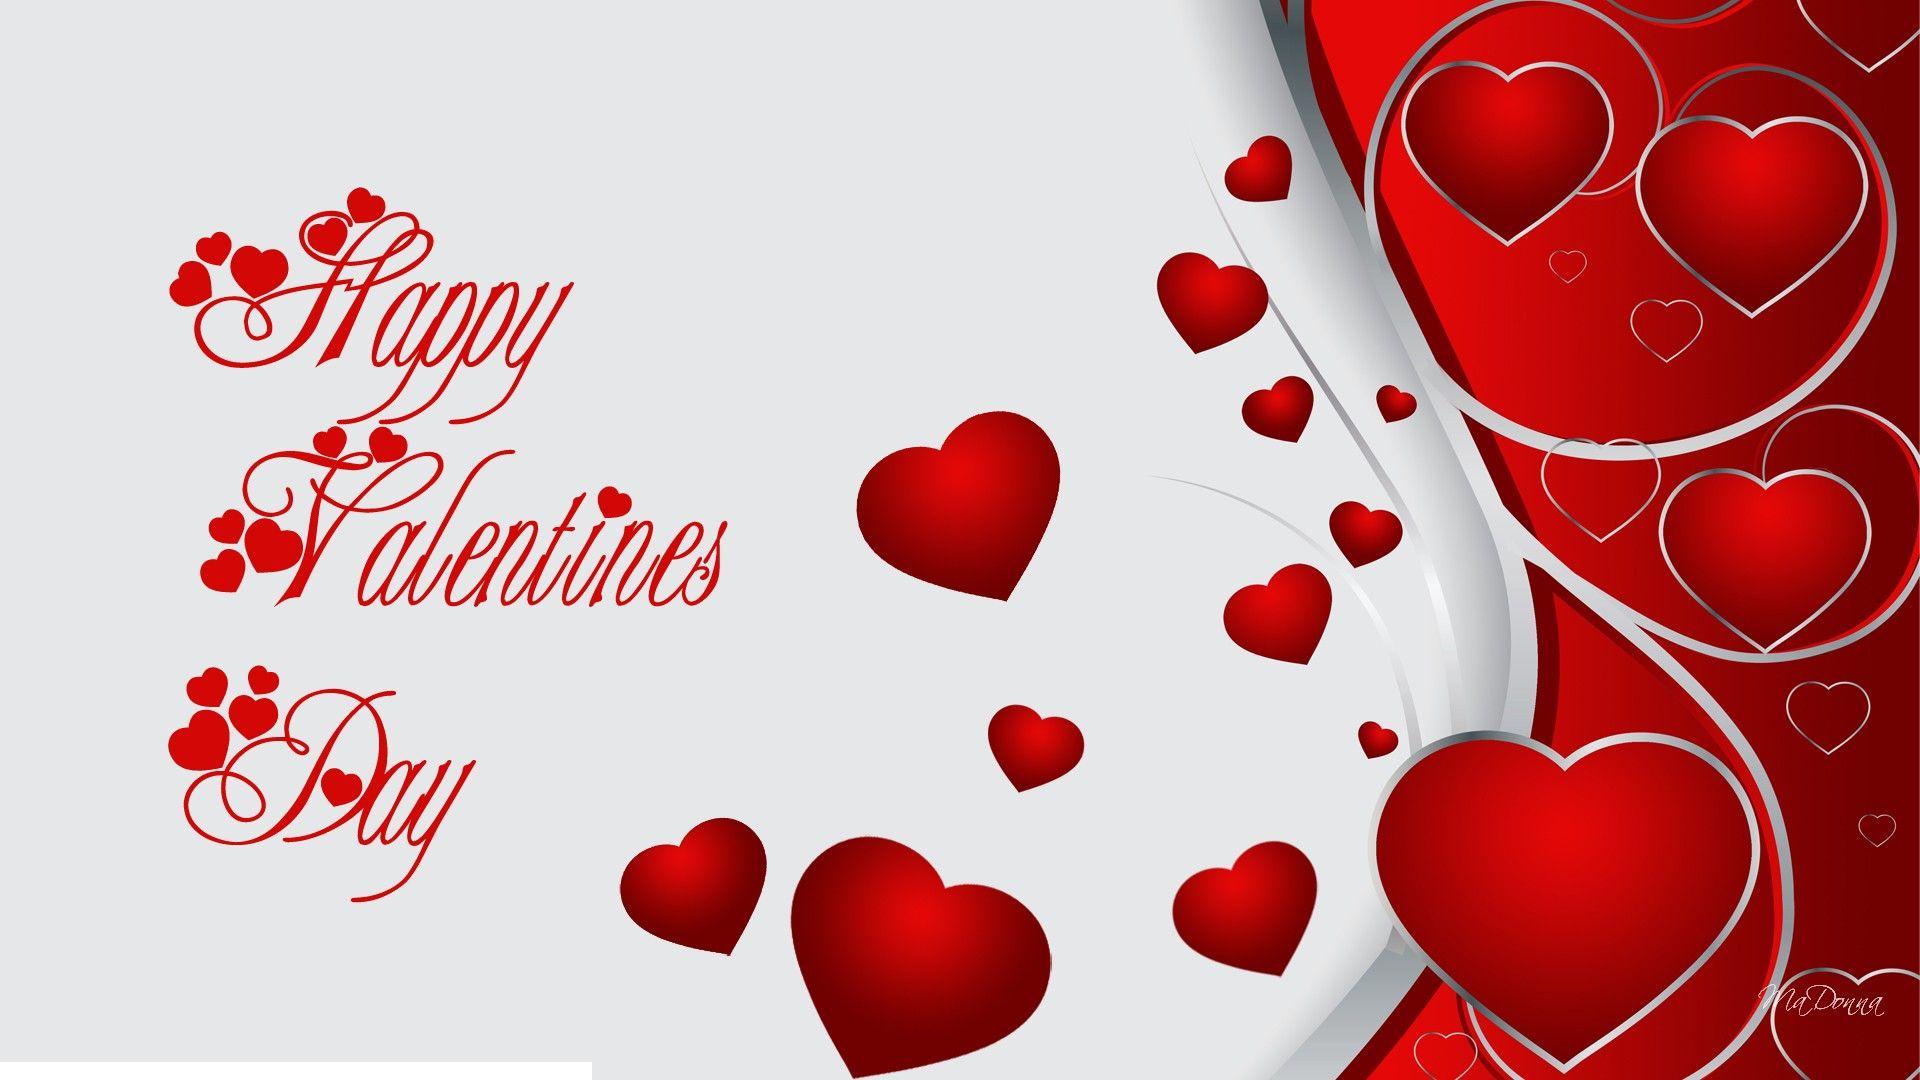 Best Valentine's Day PC Wallpaper to Make the Mood Romantic